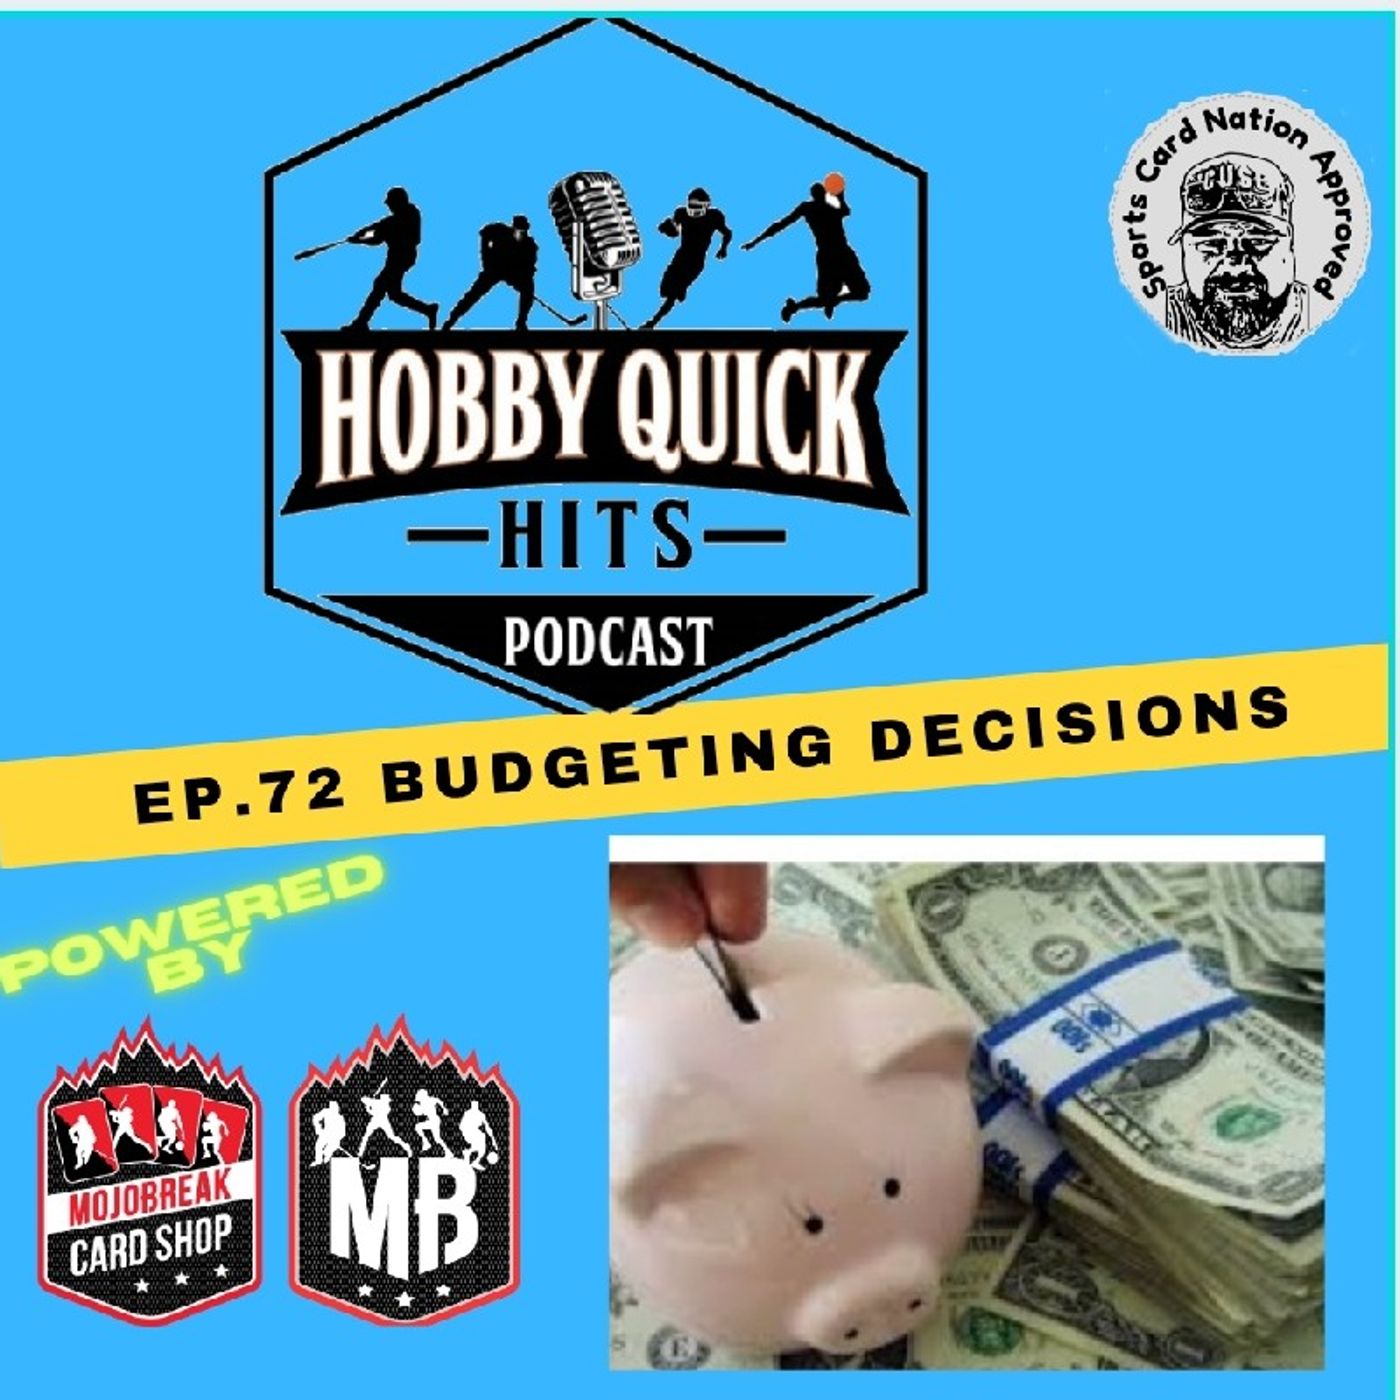 Hobby Quick Hits Ep.72 Budgeting Decisions